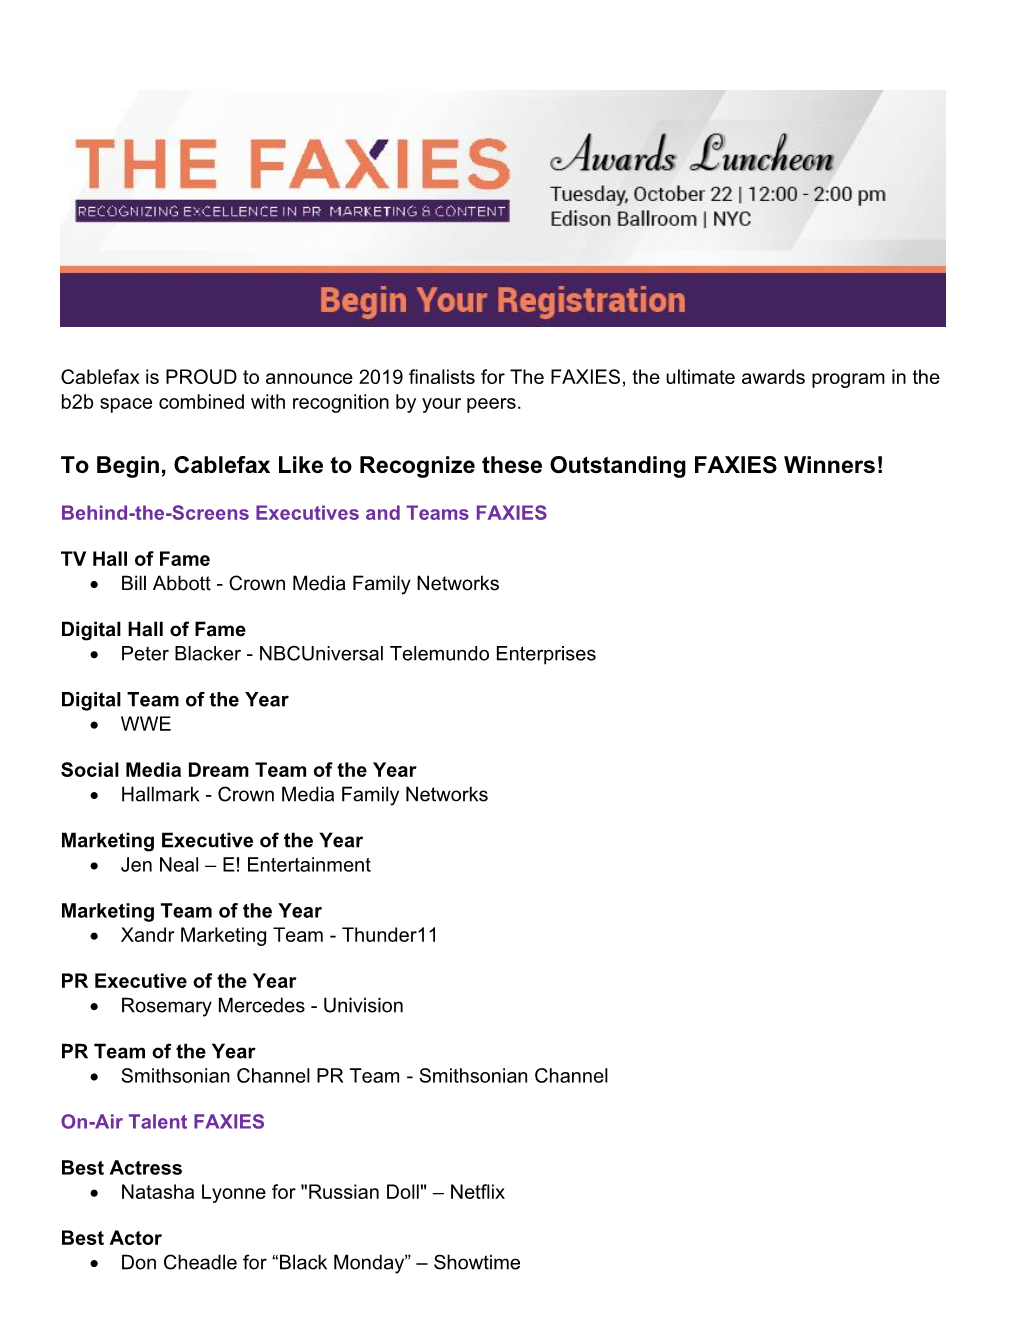 To Begin, Cablefax Like to Recognize These Outstanding FAXIES Winners!